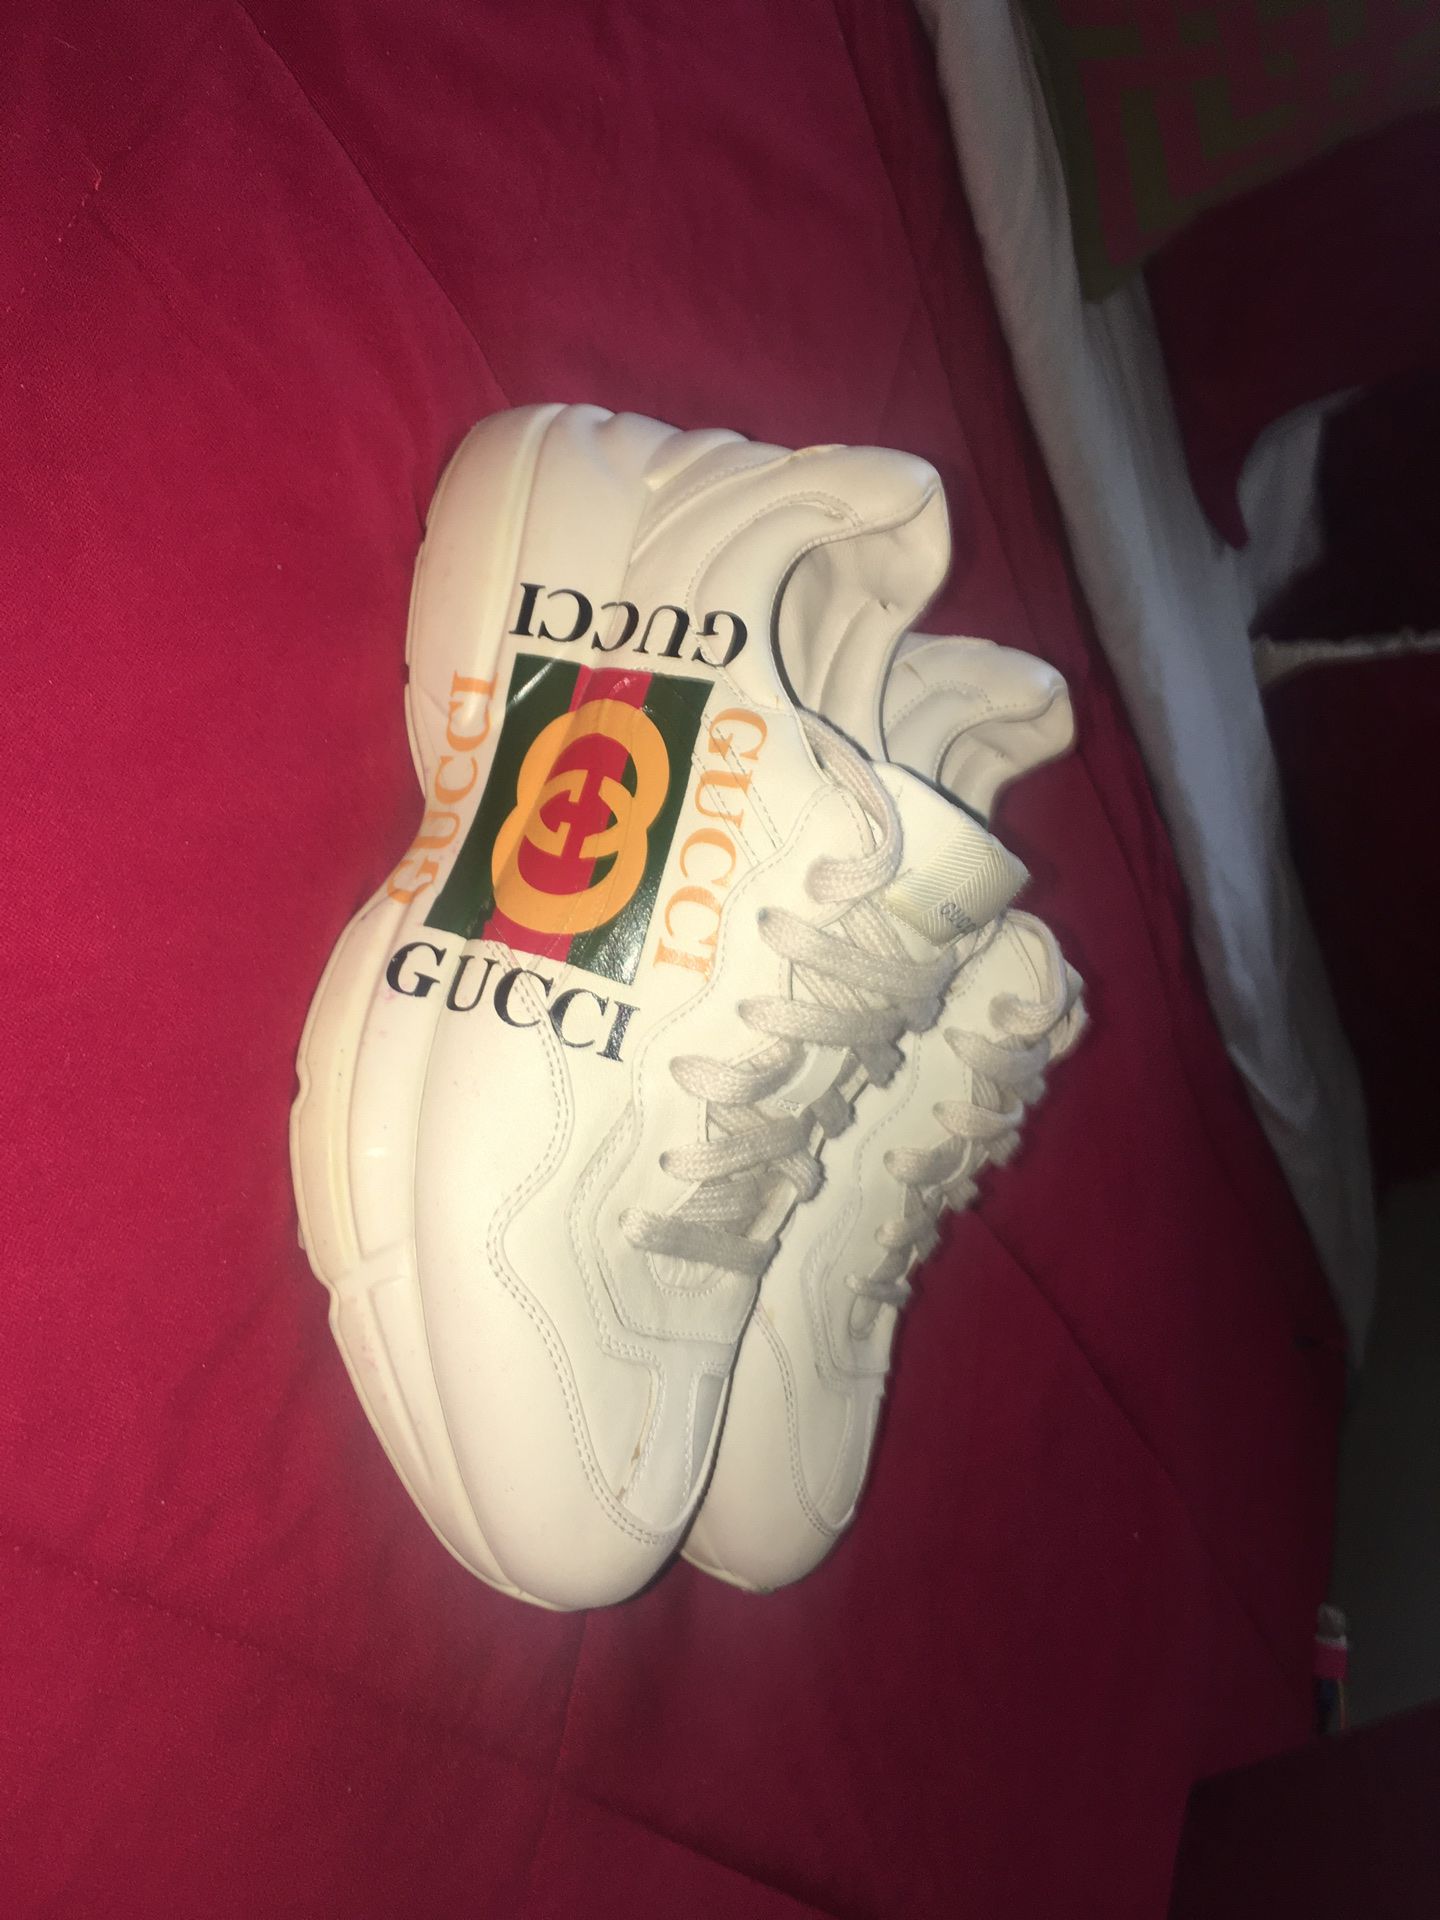 Gucci Rython shoes/no insole/will negotiate/